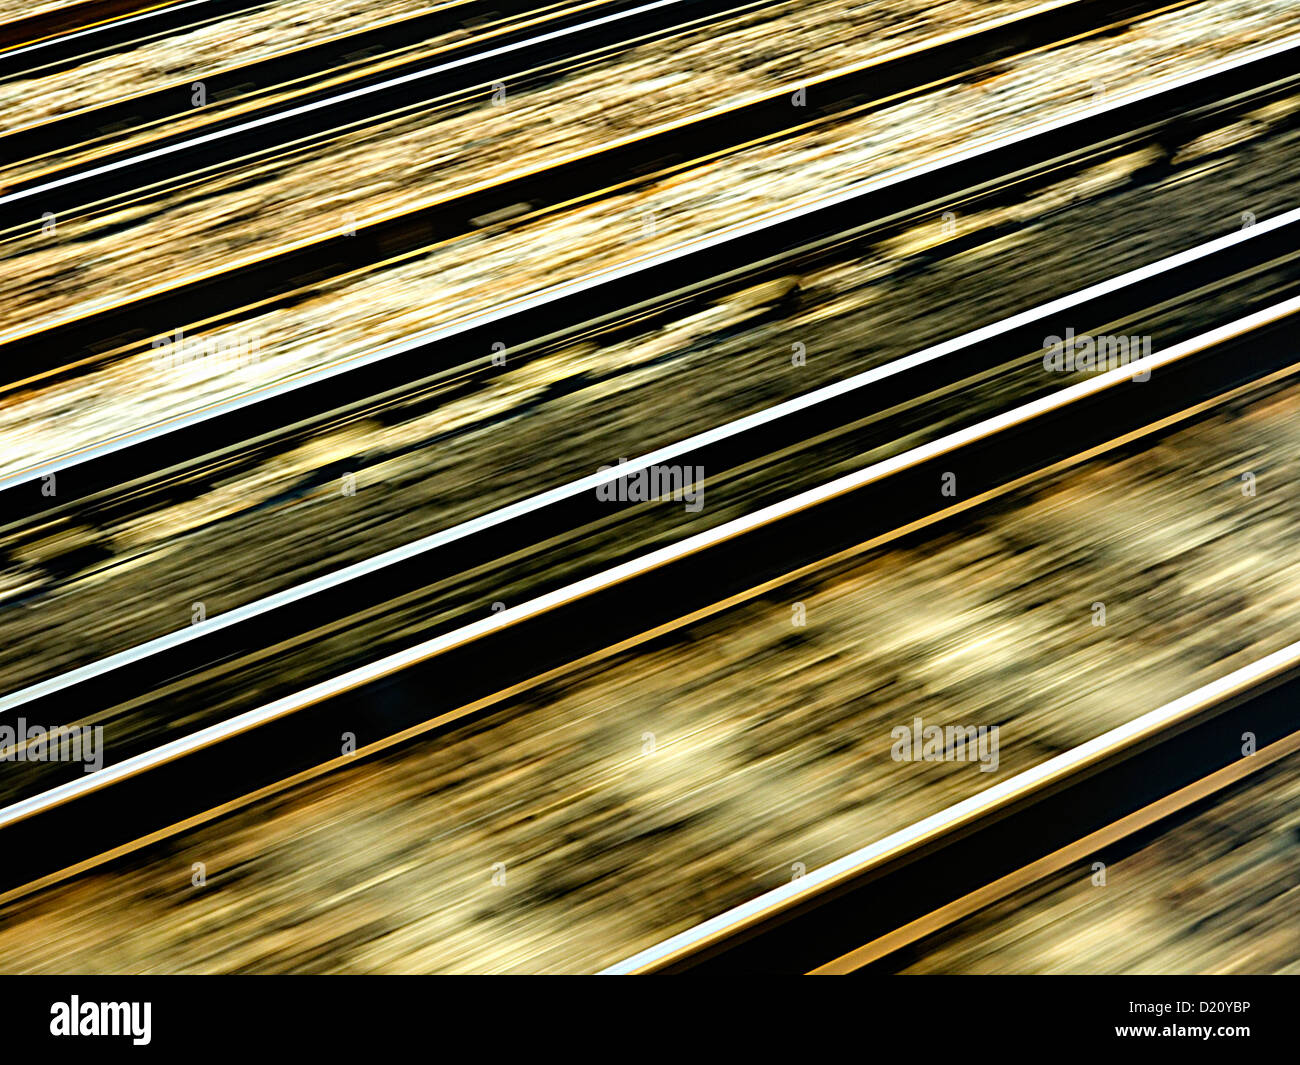 Railway lines at speed in London, UK Stock Photo